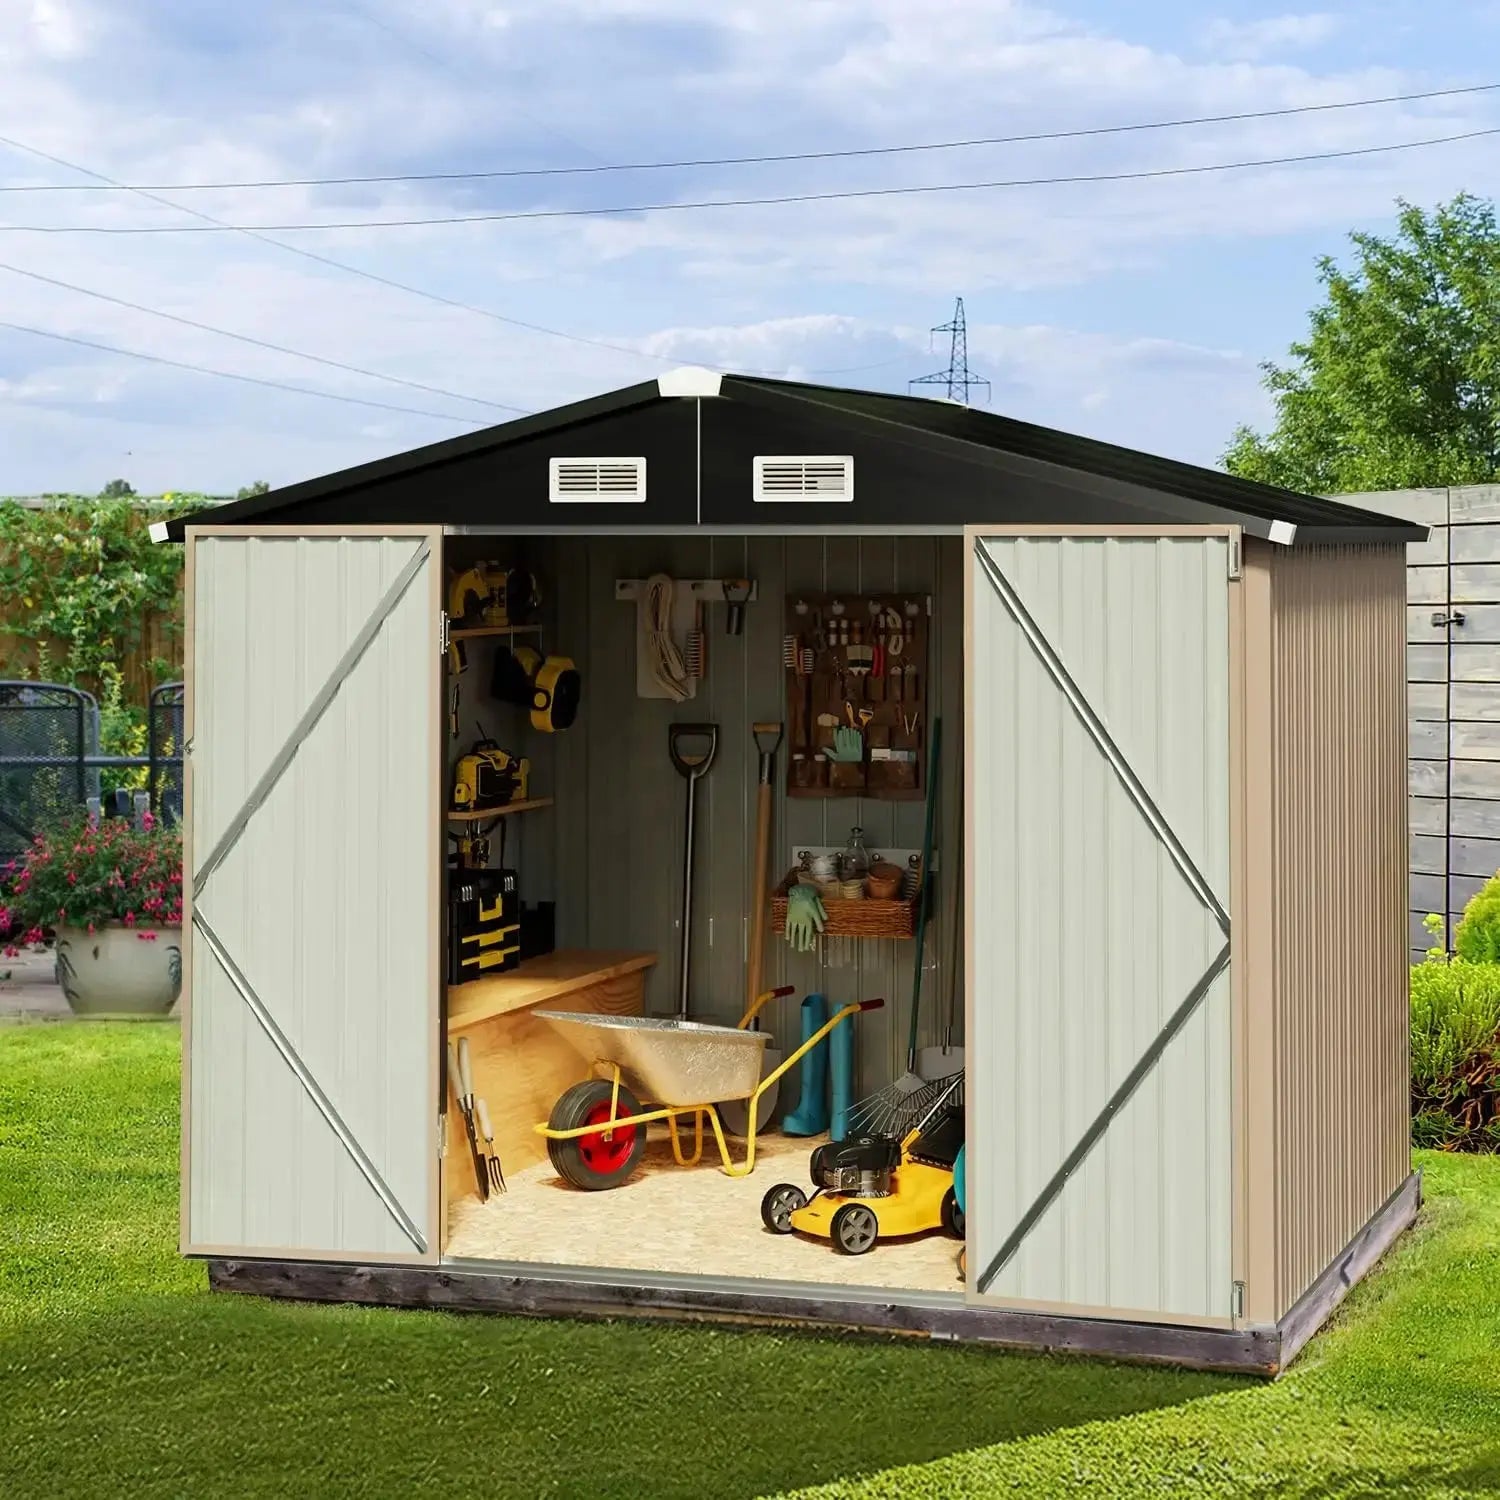 Spacious Outdoor Storage Shed,3x5/6x8/8x10FT,Durable and Stable, Garbage Can,Outdoor Metal Shed for Tool,Garden,Bike, Brown - The Greenhouse Pros